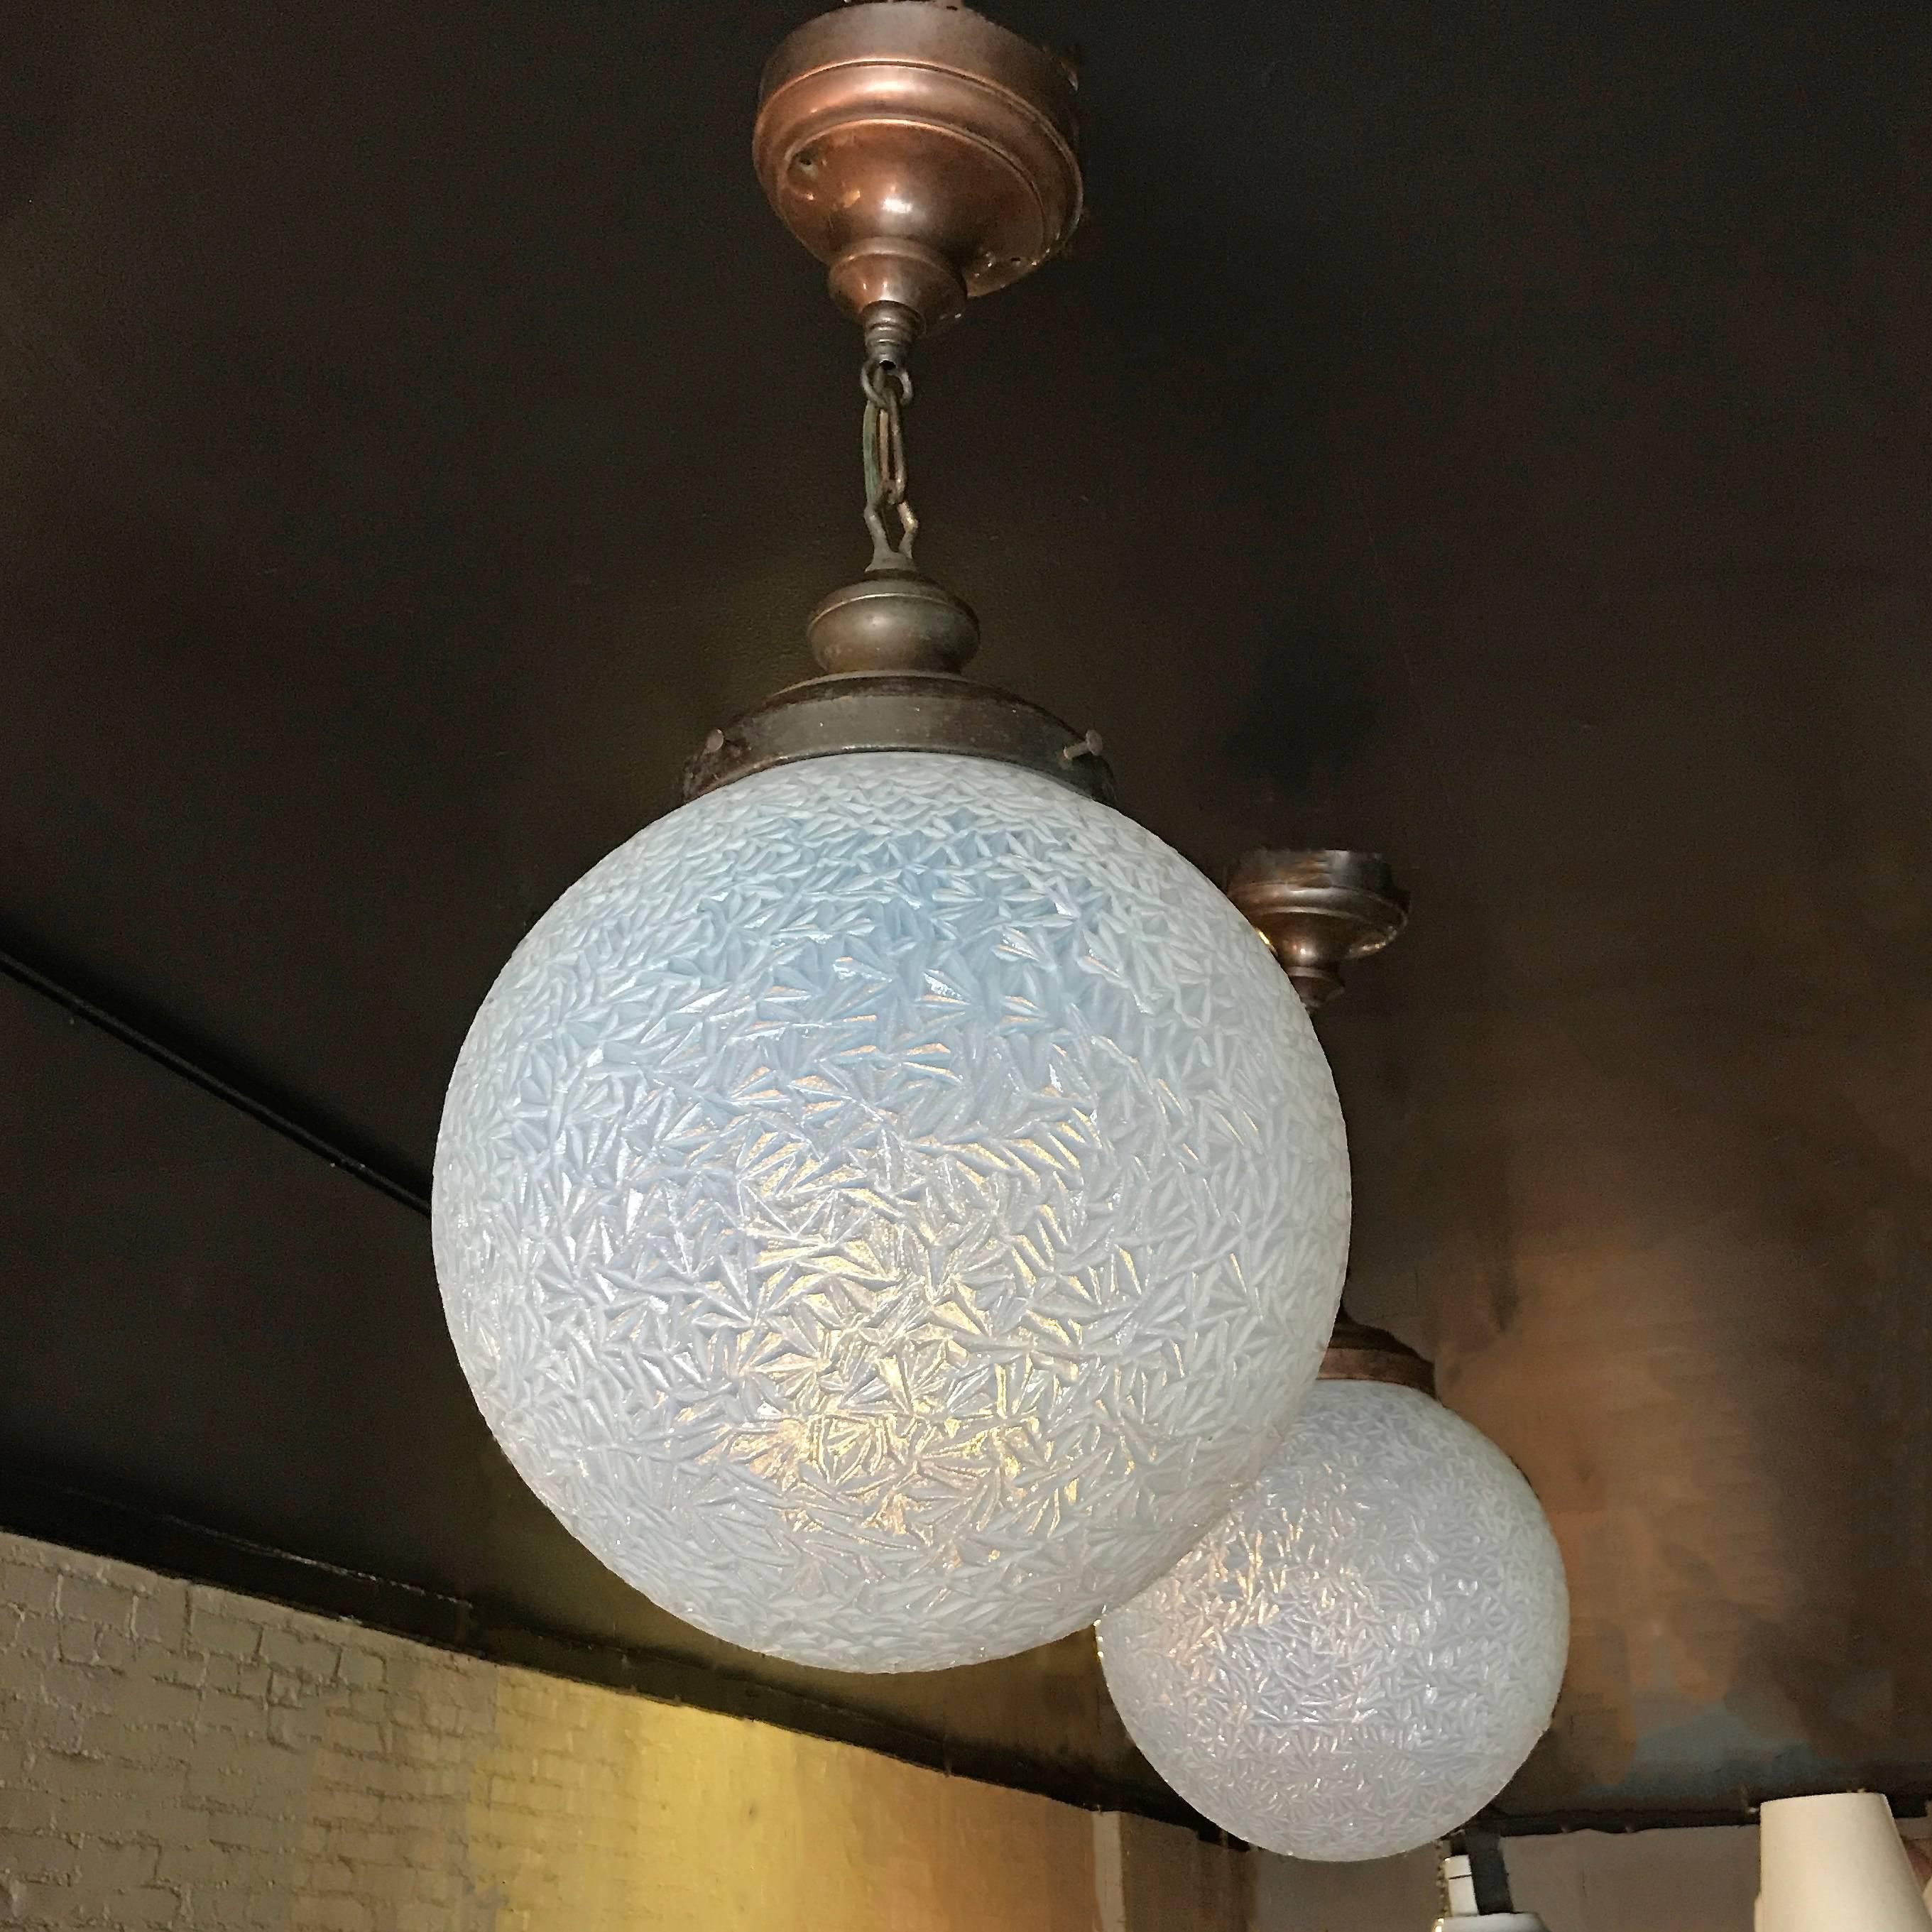 Exceptional pair of turn of the century, large, opaline or vaseline, crinkled glass, globe pendant lights from a railroad station with brass fitters, chains and canopies. Overall Height with chain and canopy measures is 28 in.